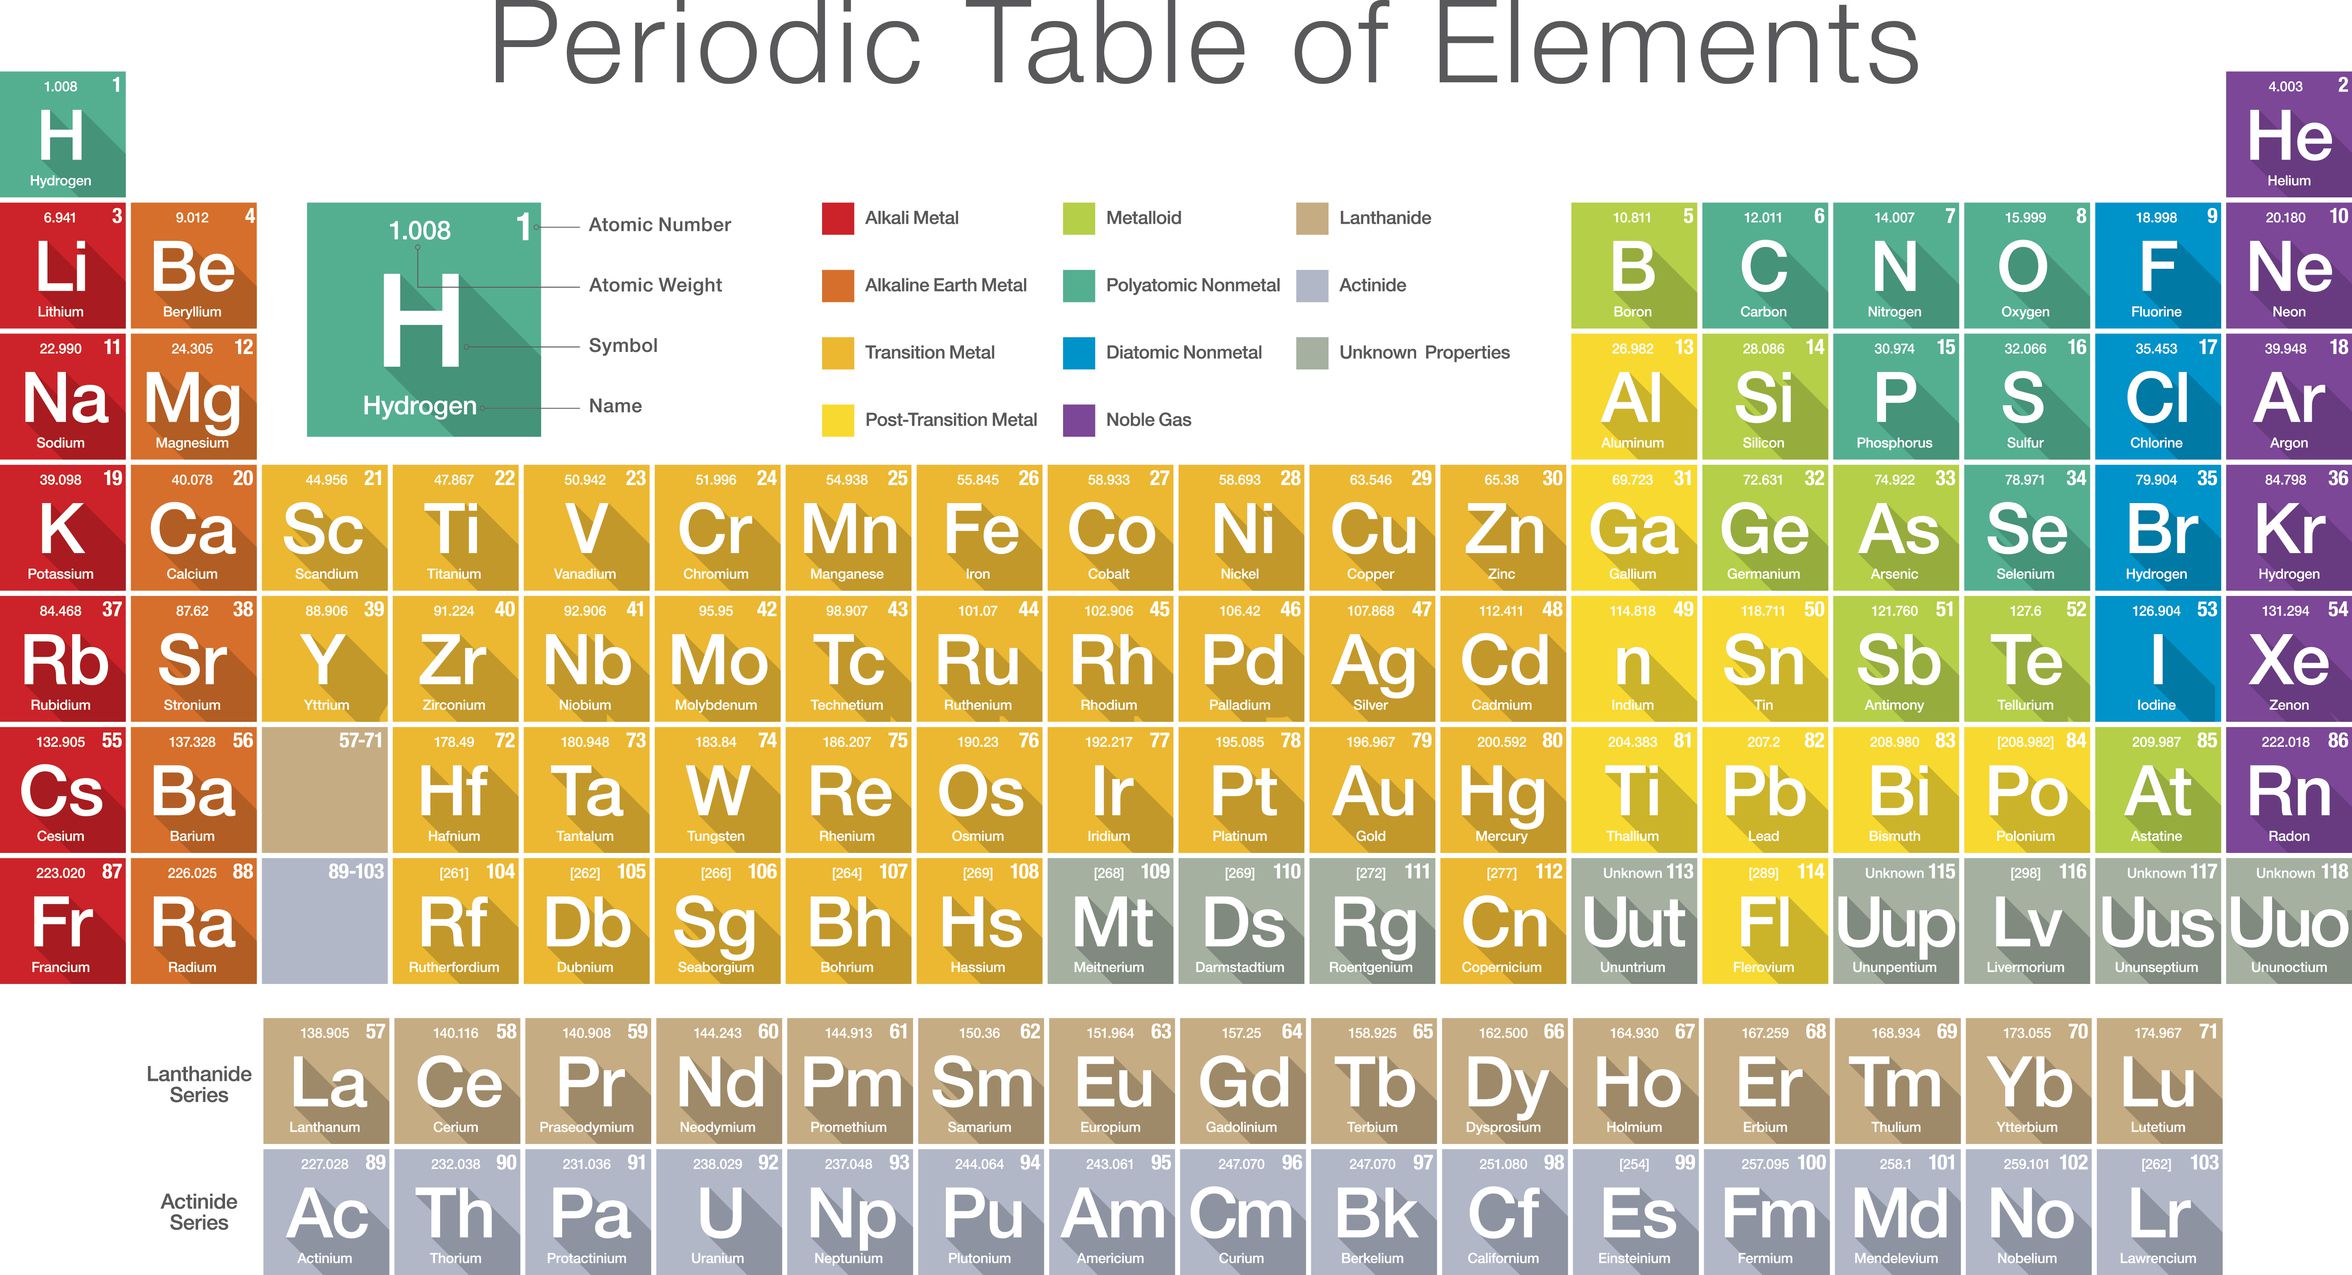 What Is an Element in Chemistry?